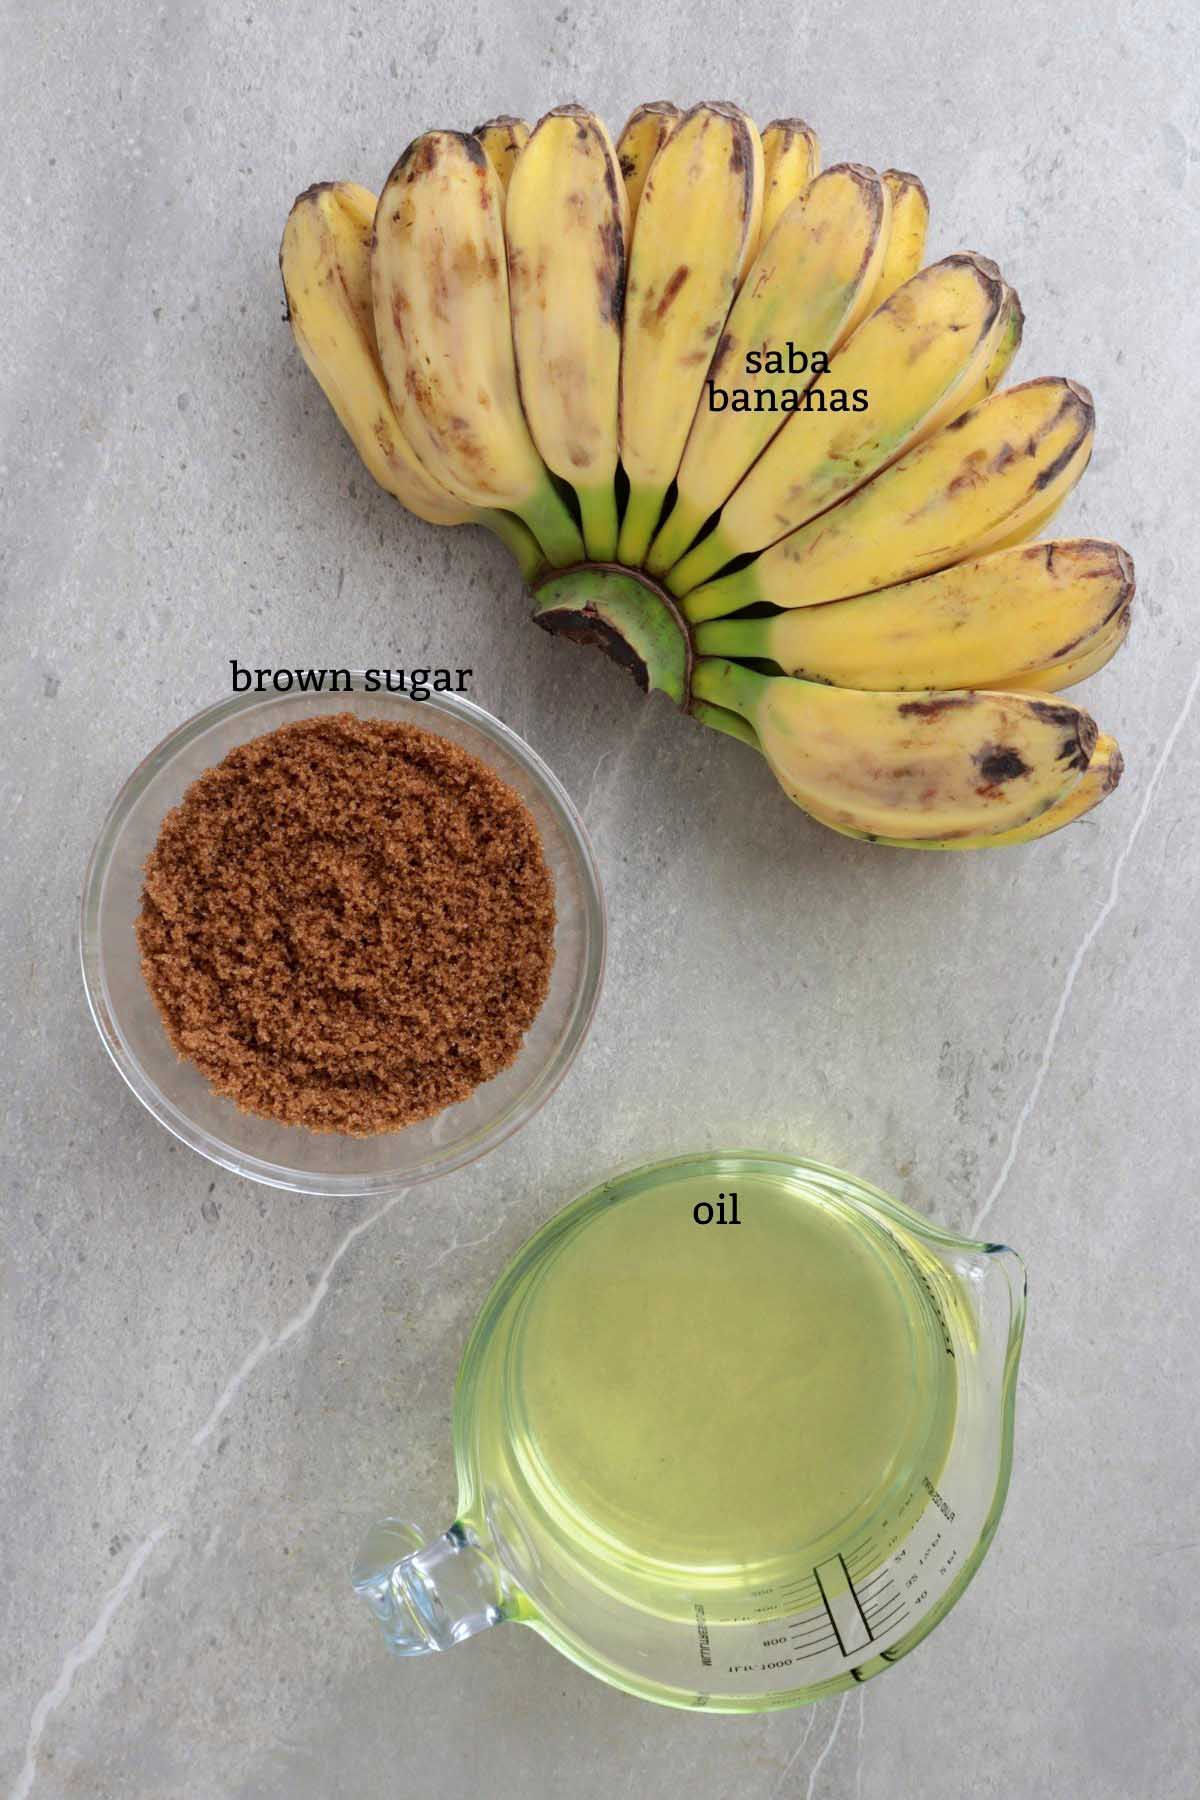 Ingredients for Banana Cue